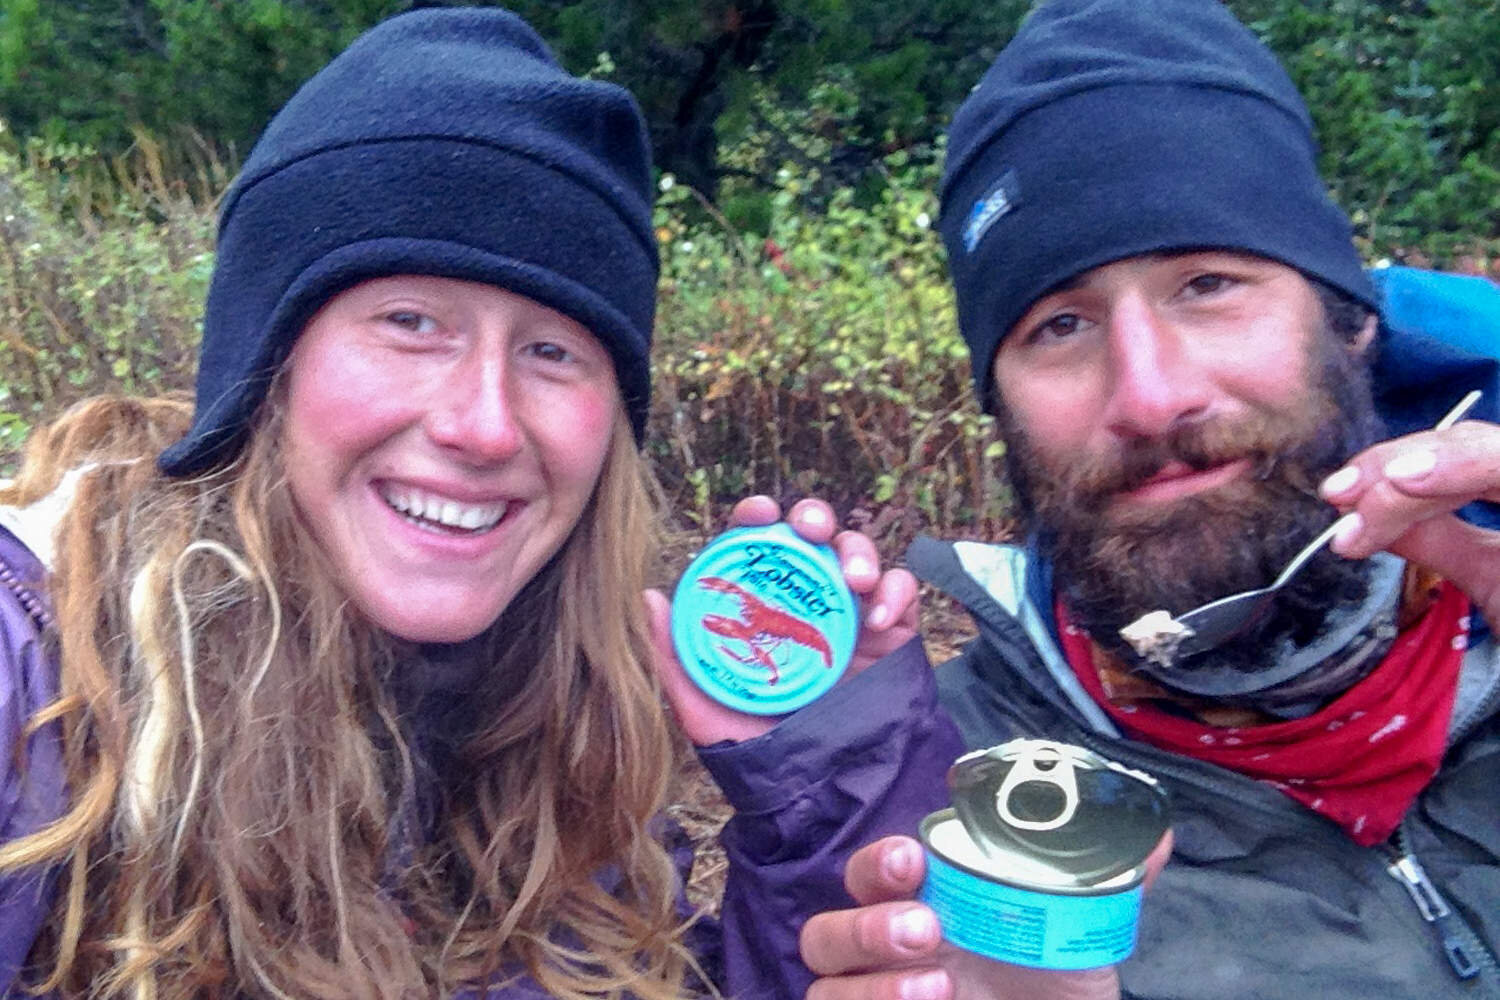 your author, heather, enjoying some canned lobster at the end of her cdt hike!